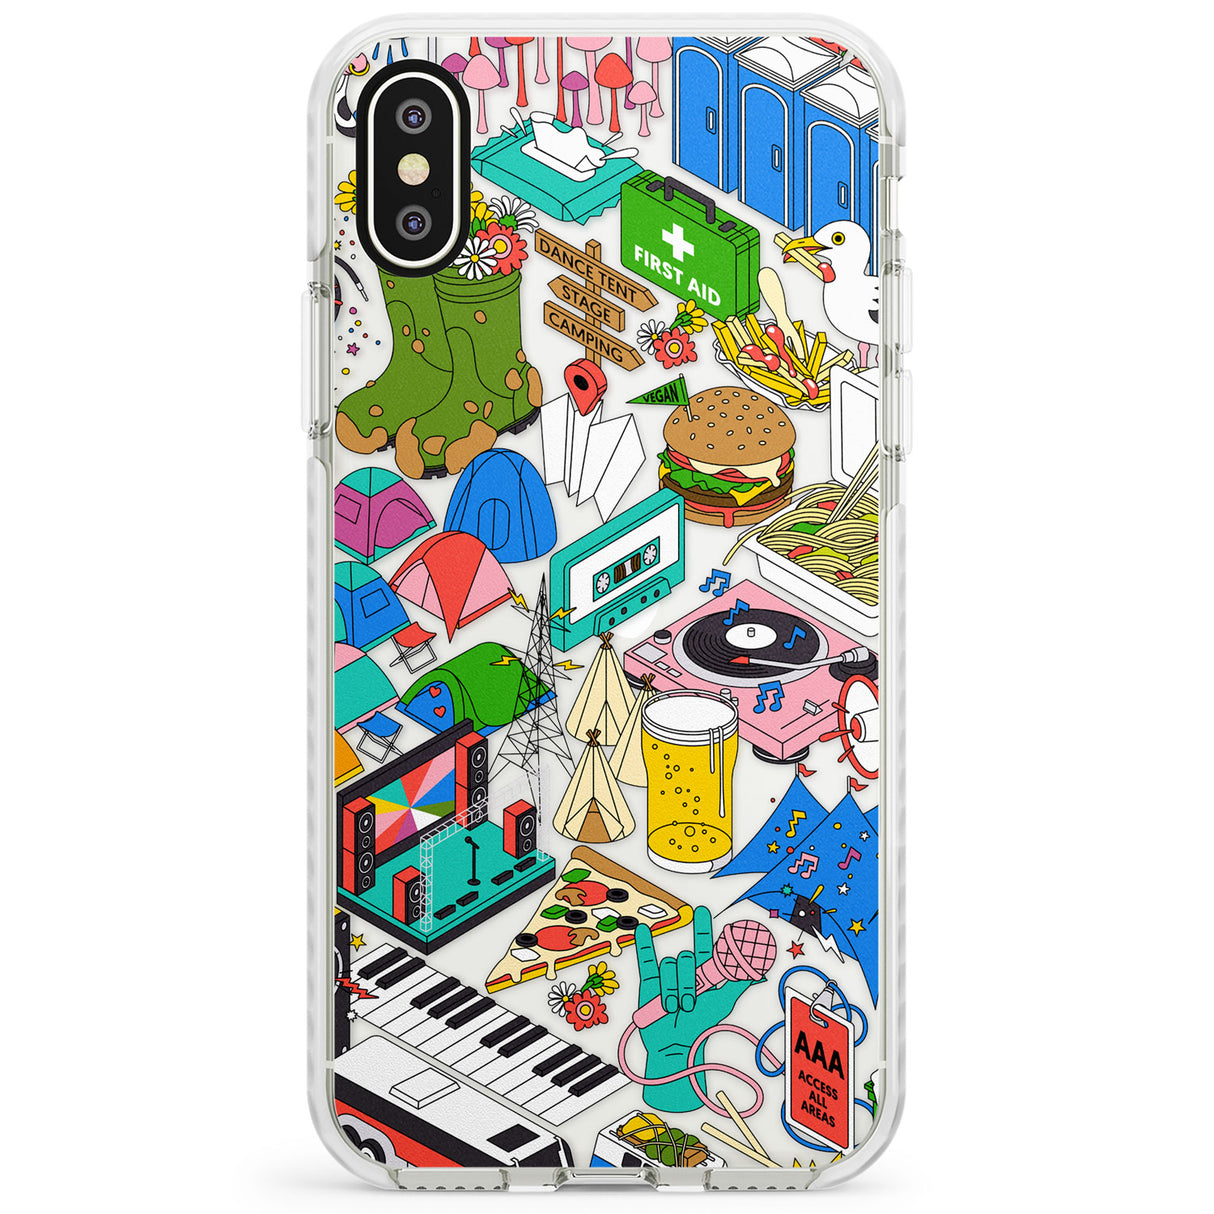 Festival Frenzy Impact Phone Case for iPhone X XS Max XR